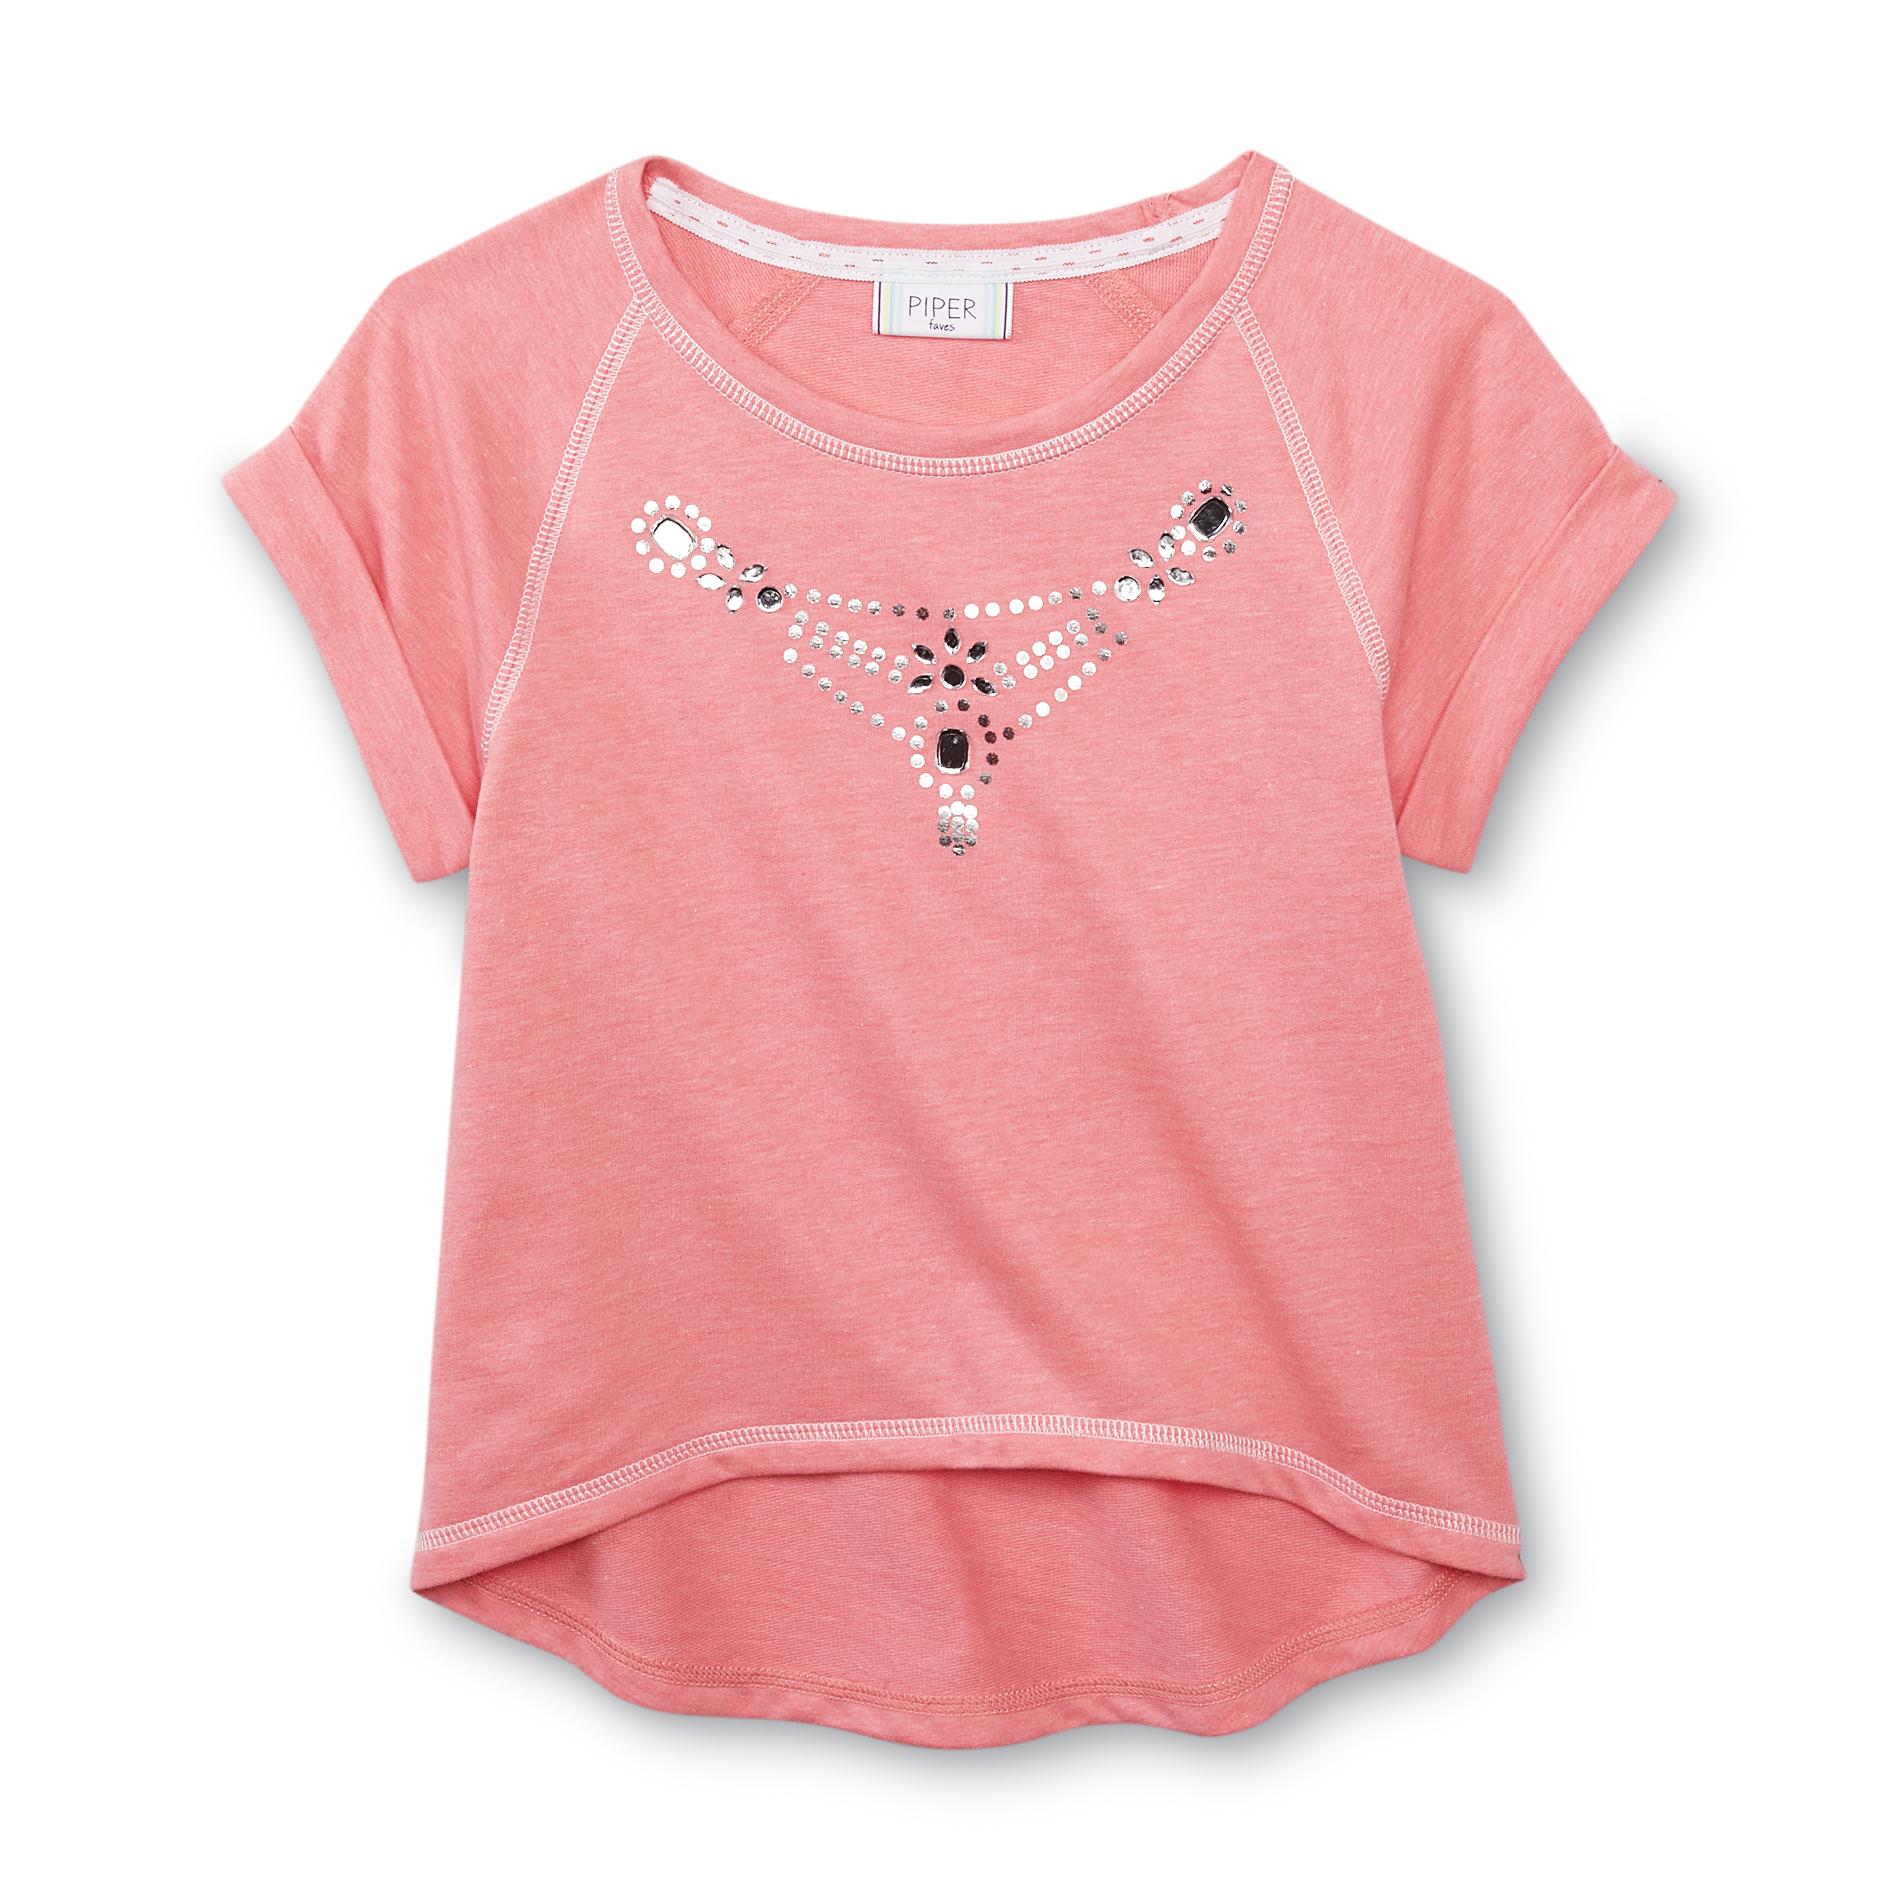 Piper Faves Girl's French Terry T-Shirt